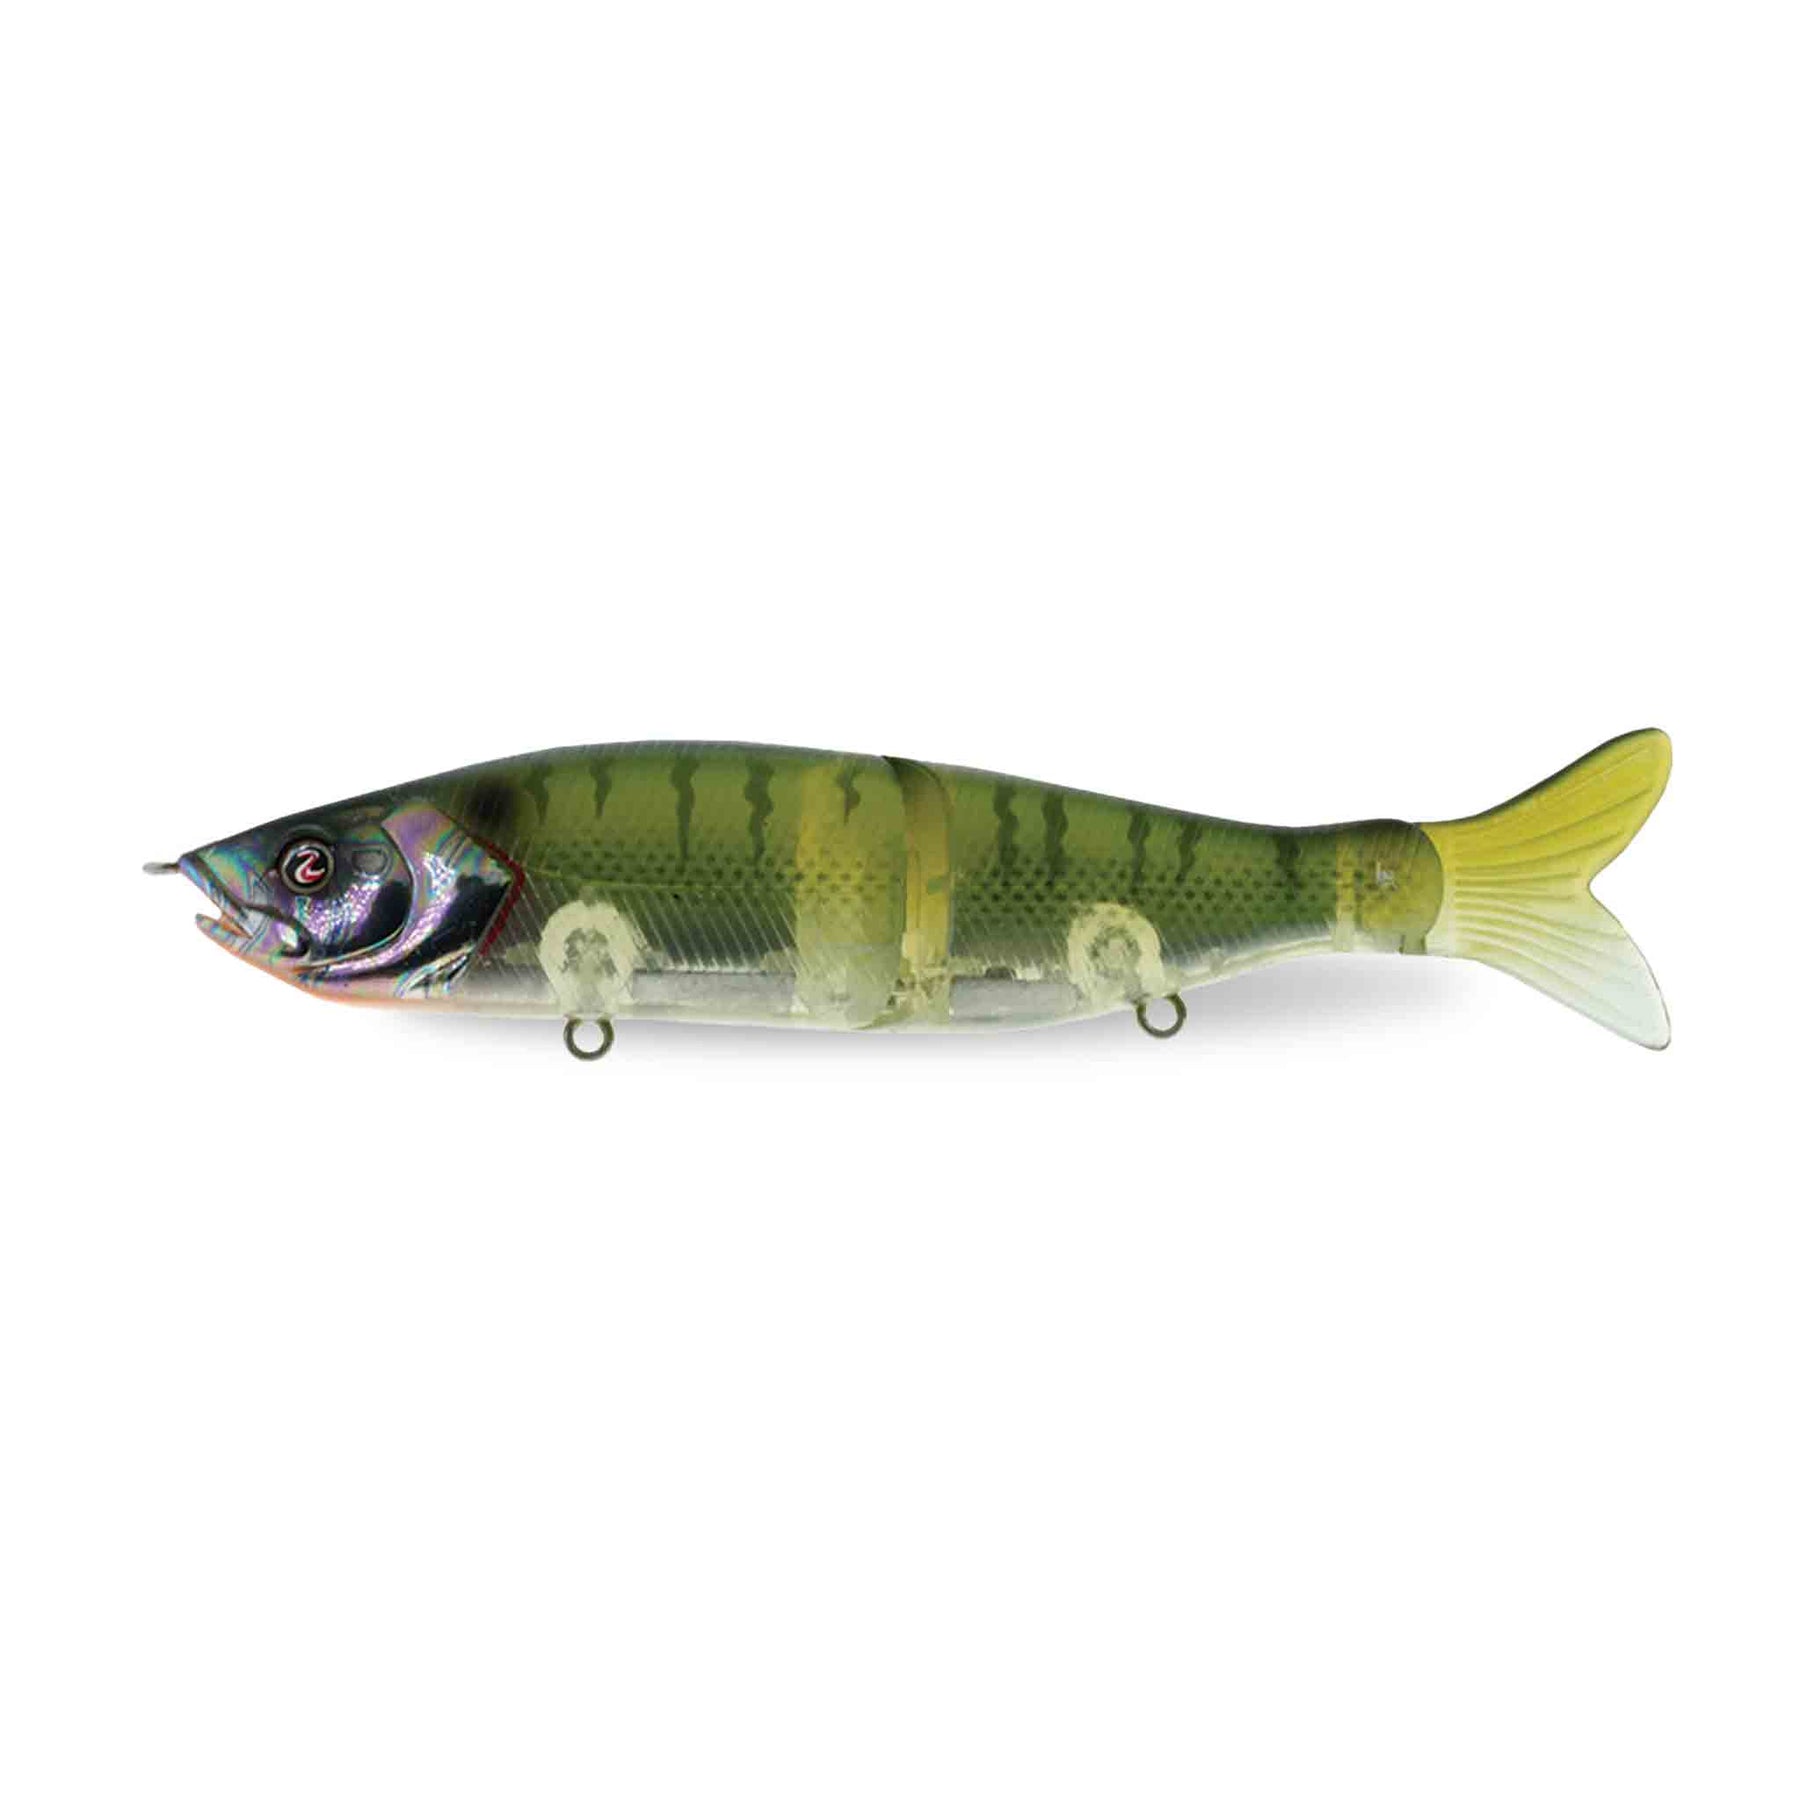 View of Jerk-Glide_Baits River2Sea S-Waver 200S 8" Glide Bait New Bluegill available at EZOKO Pike and Musky Shop